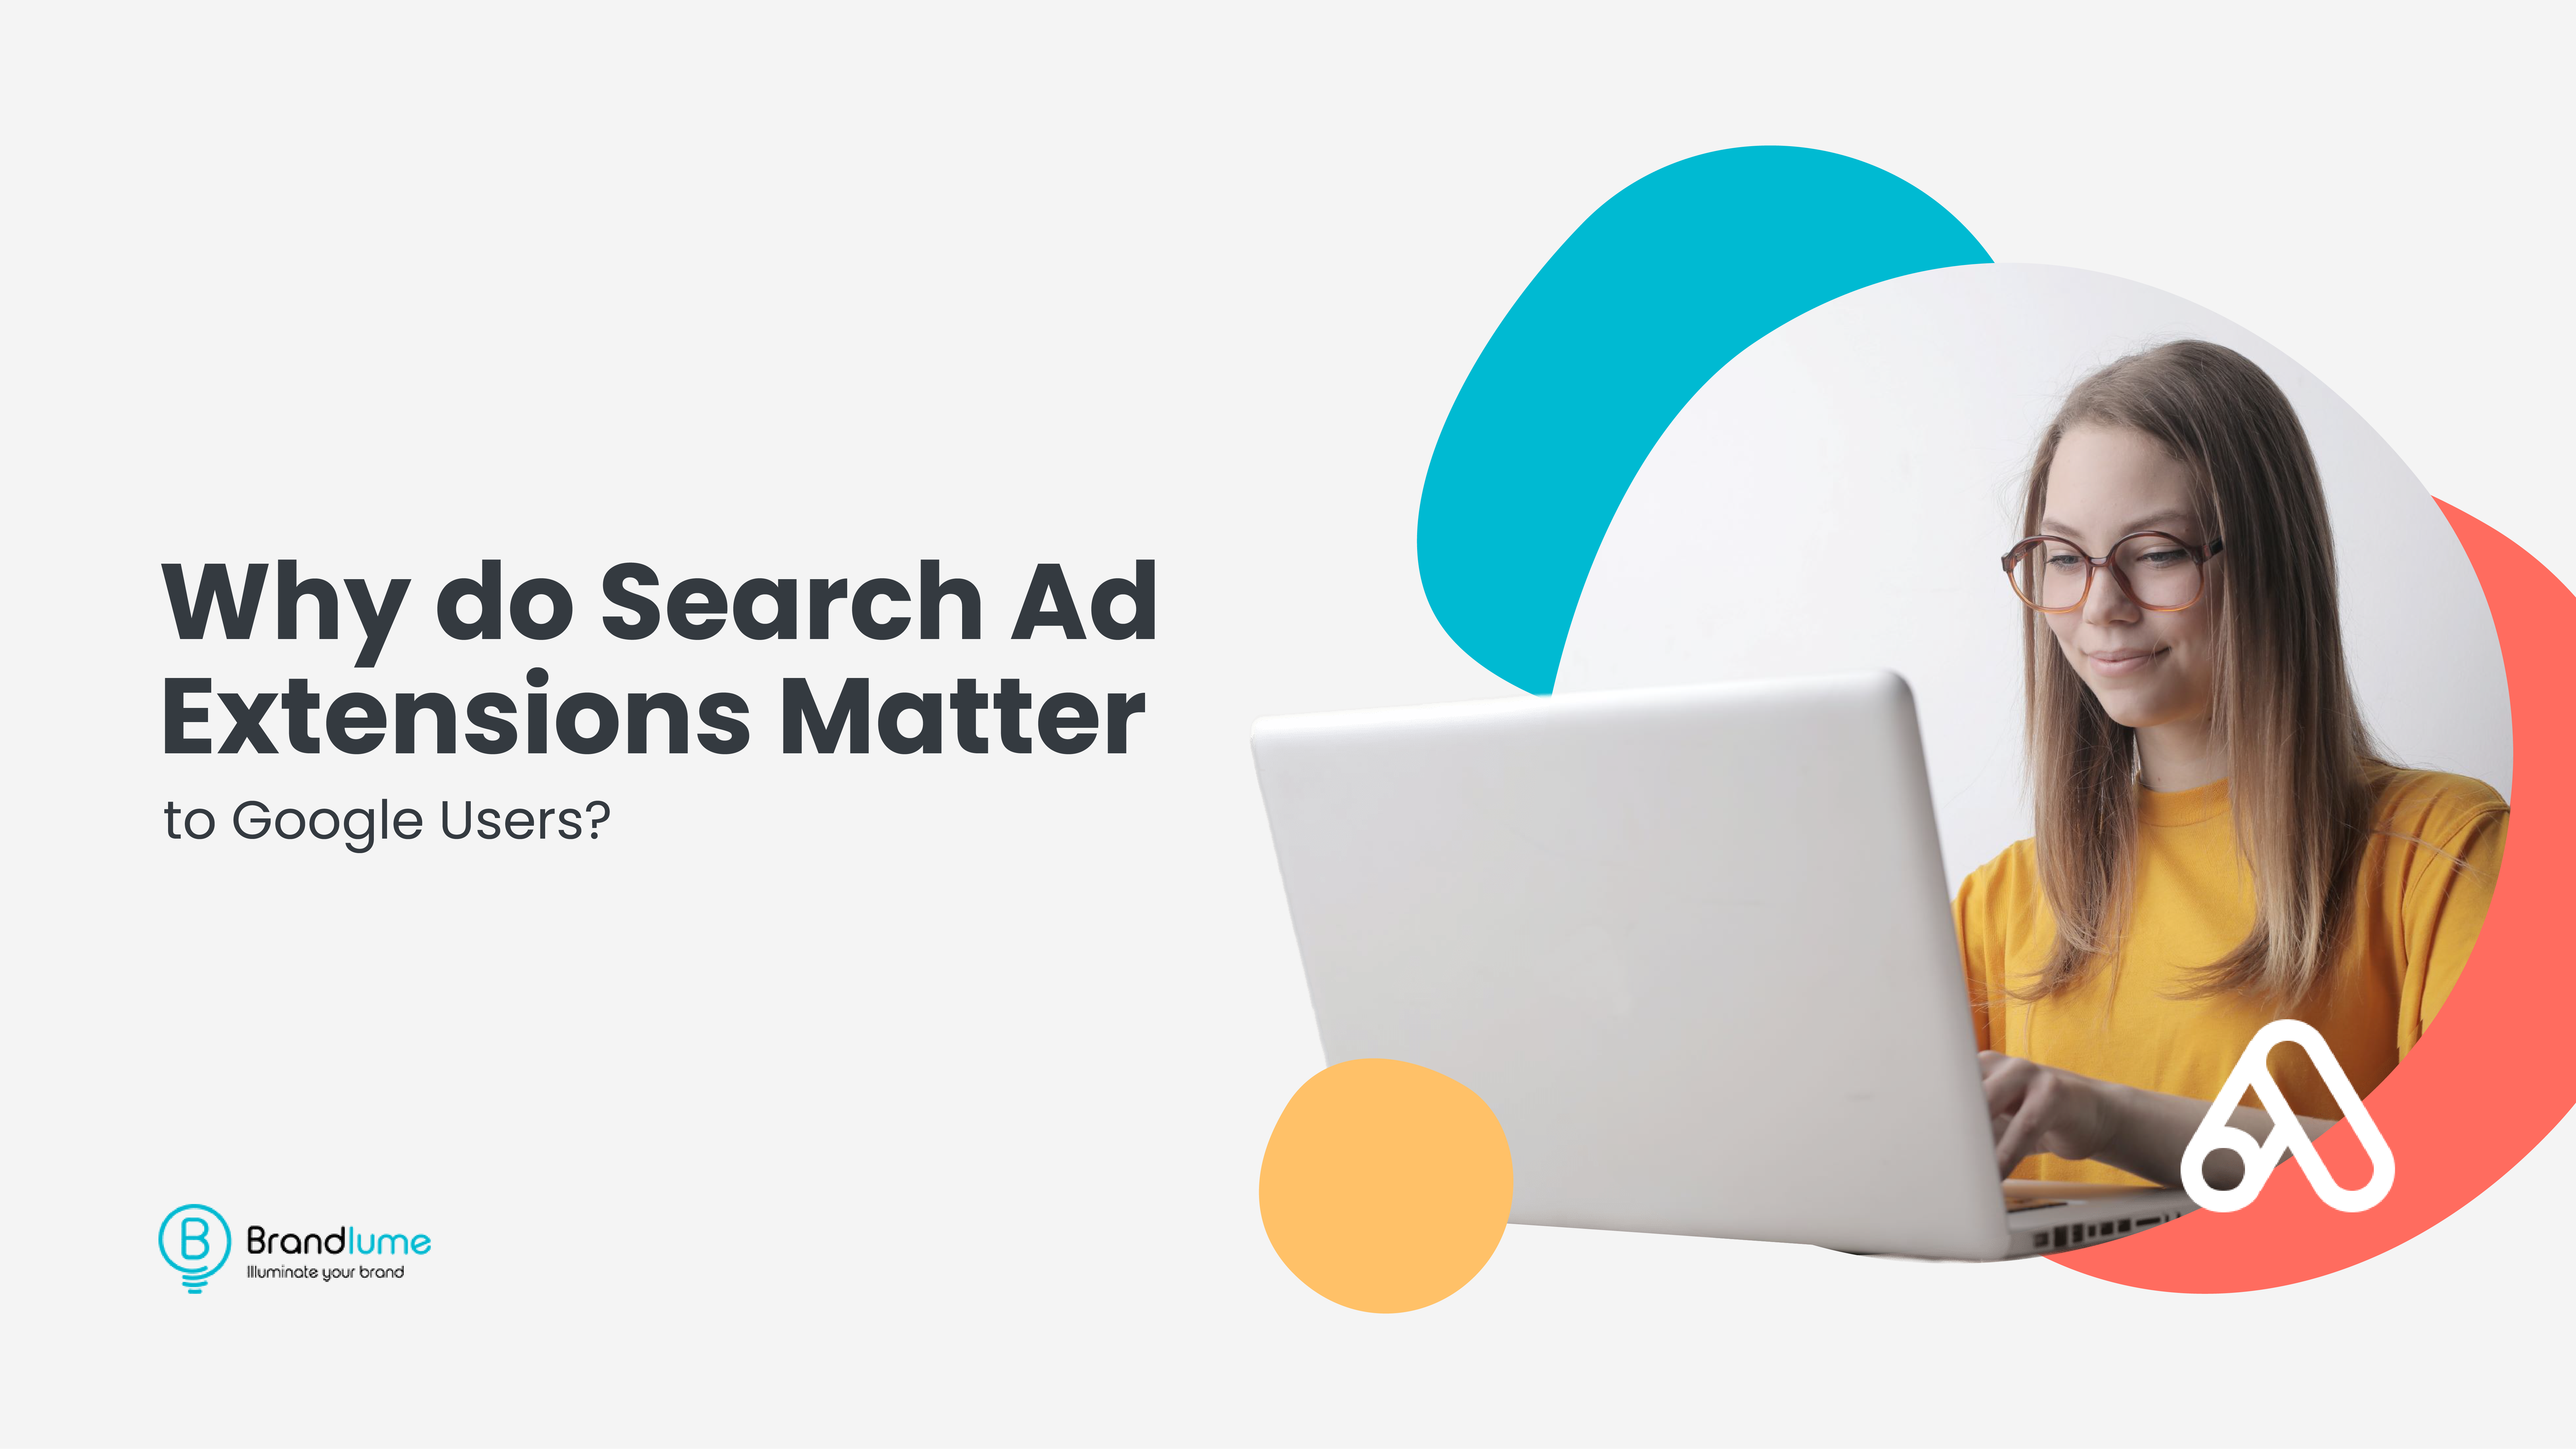 Why Do Search Ads Extension Matters to Google Users